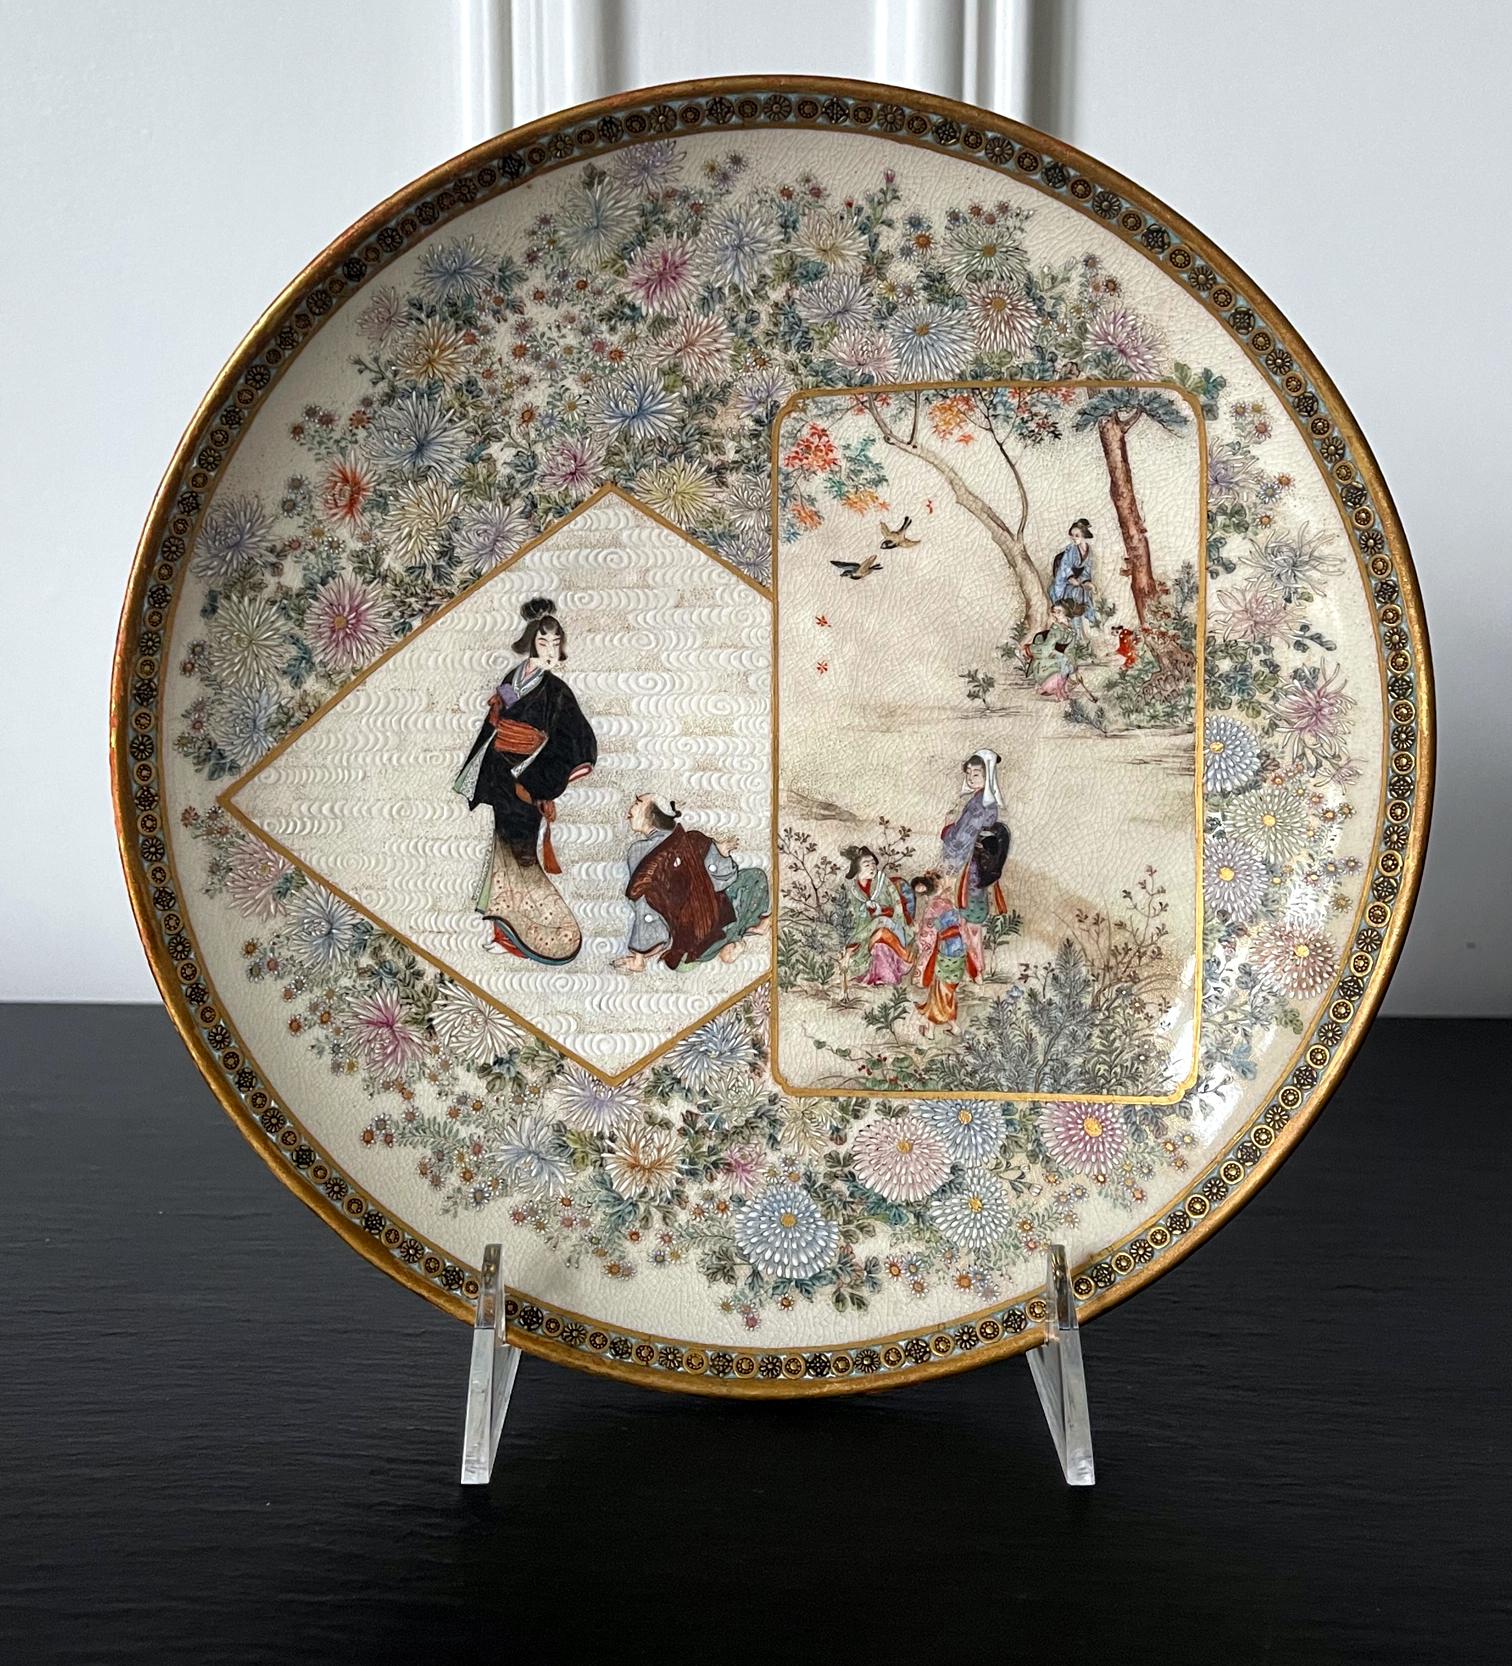 A satsuma ceramic dish made by Kinkozan studio circa 1980-1900s in the late Meiji Period. The dish with a thick robust wall is supported by a large ring base and features finely detailed surface decoration, clearly done by a master hand. Surrounded